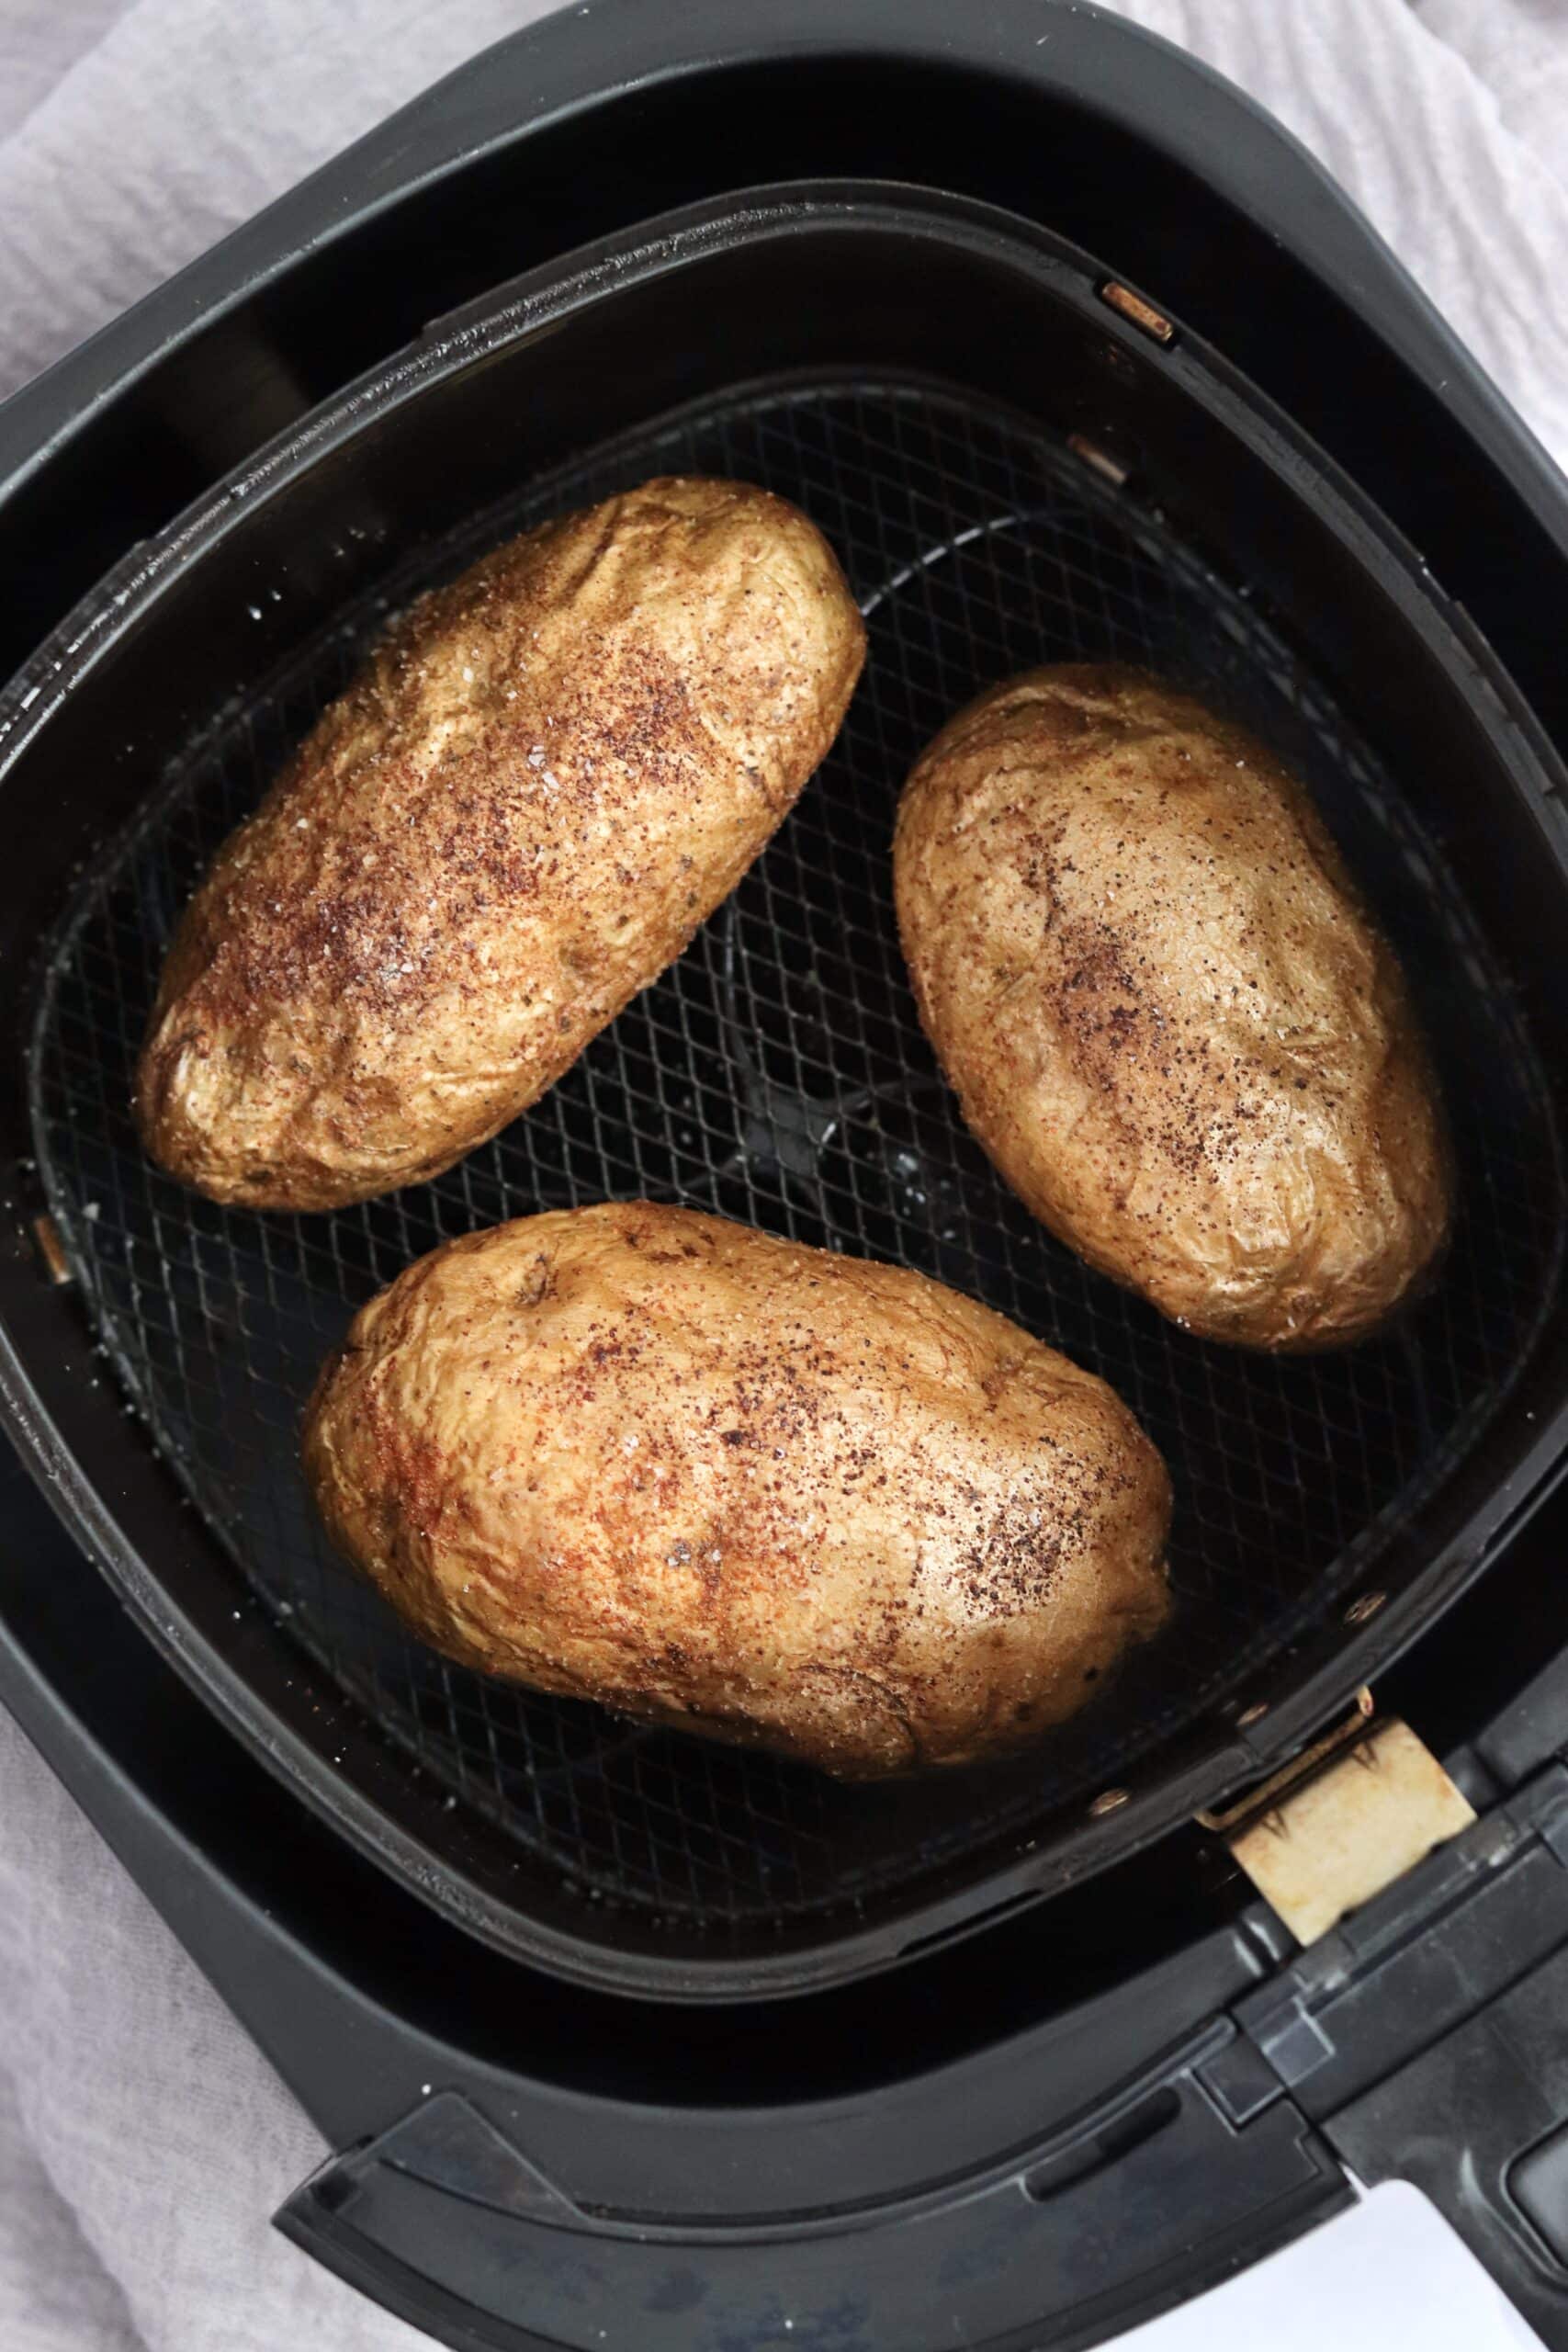 Three baked potatoes in an air fryer